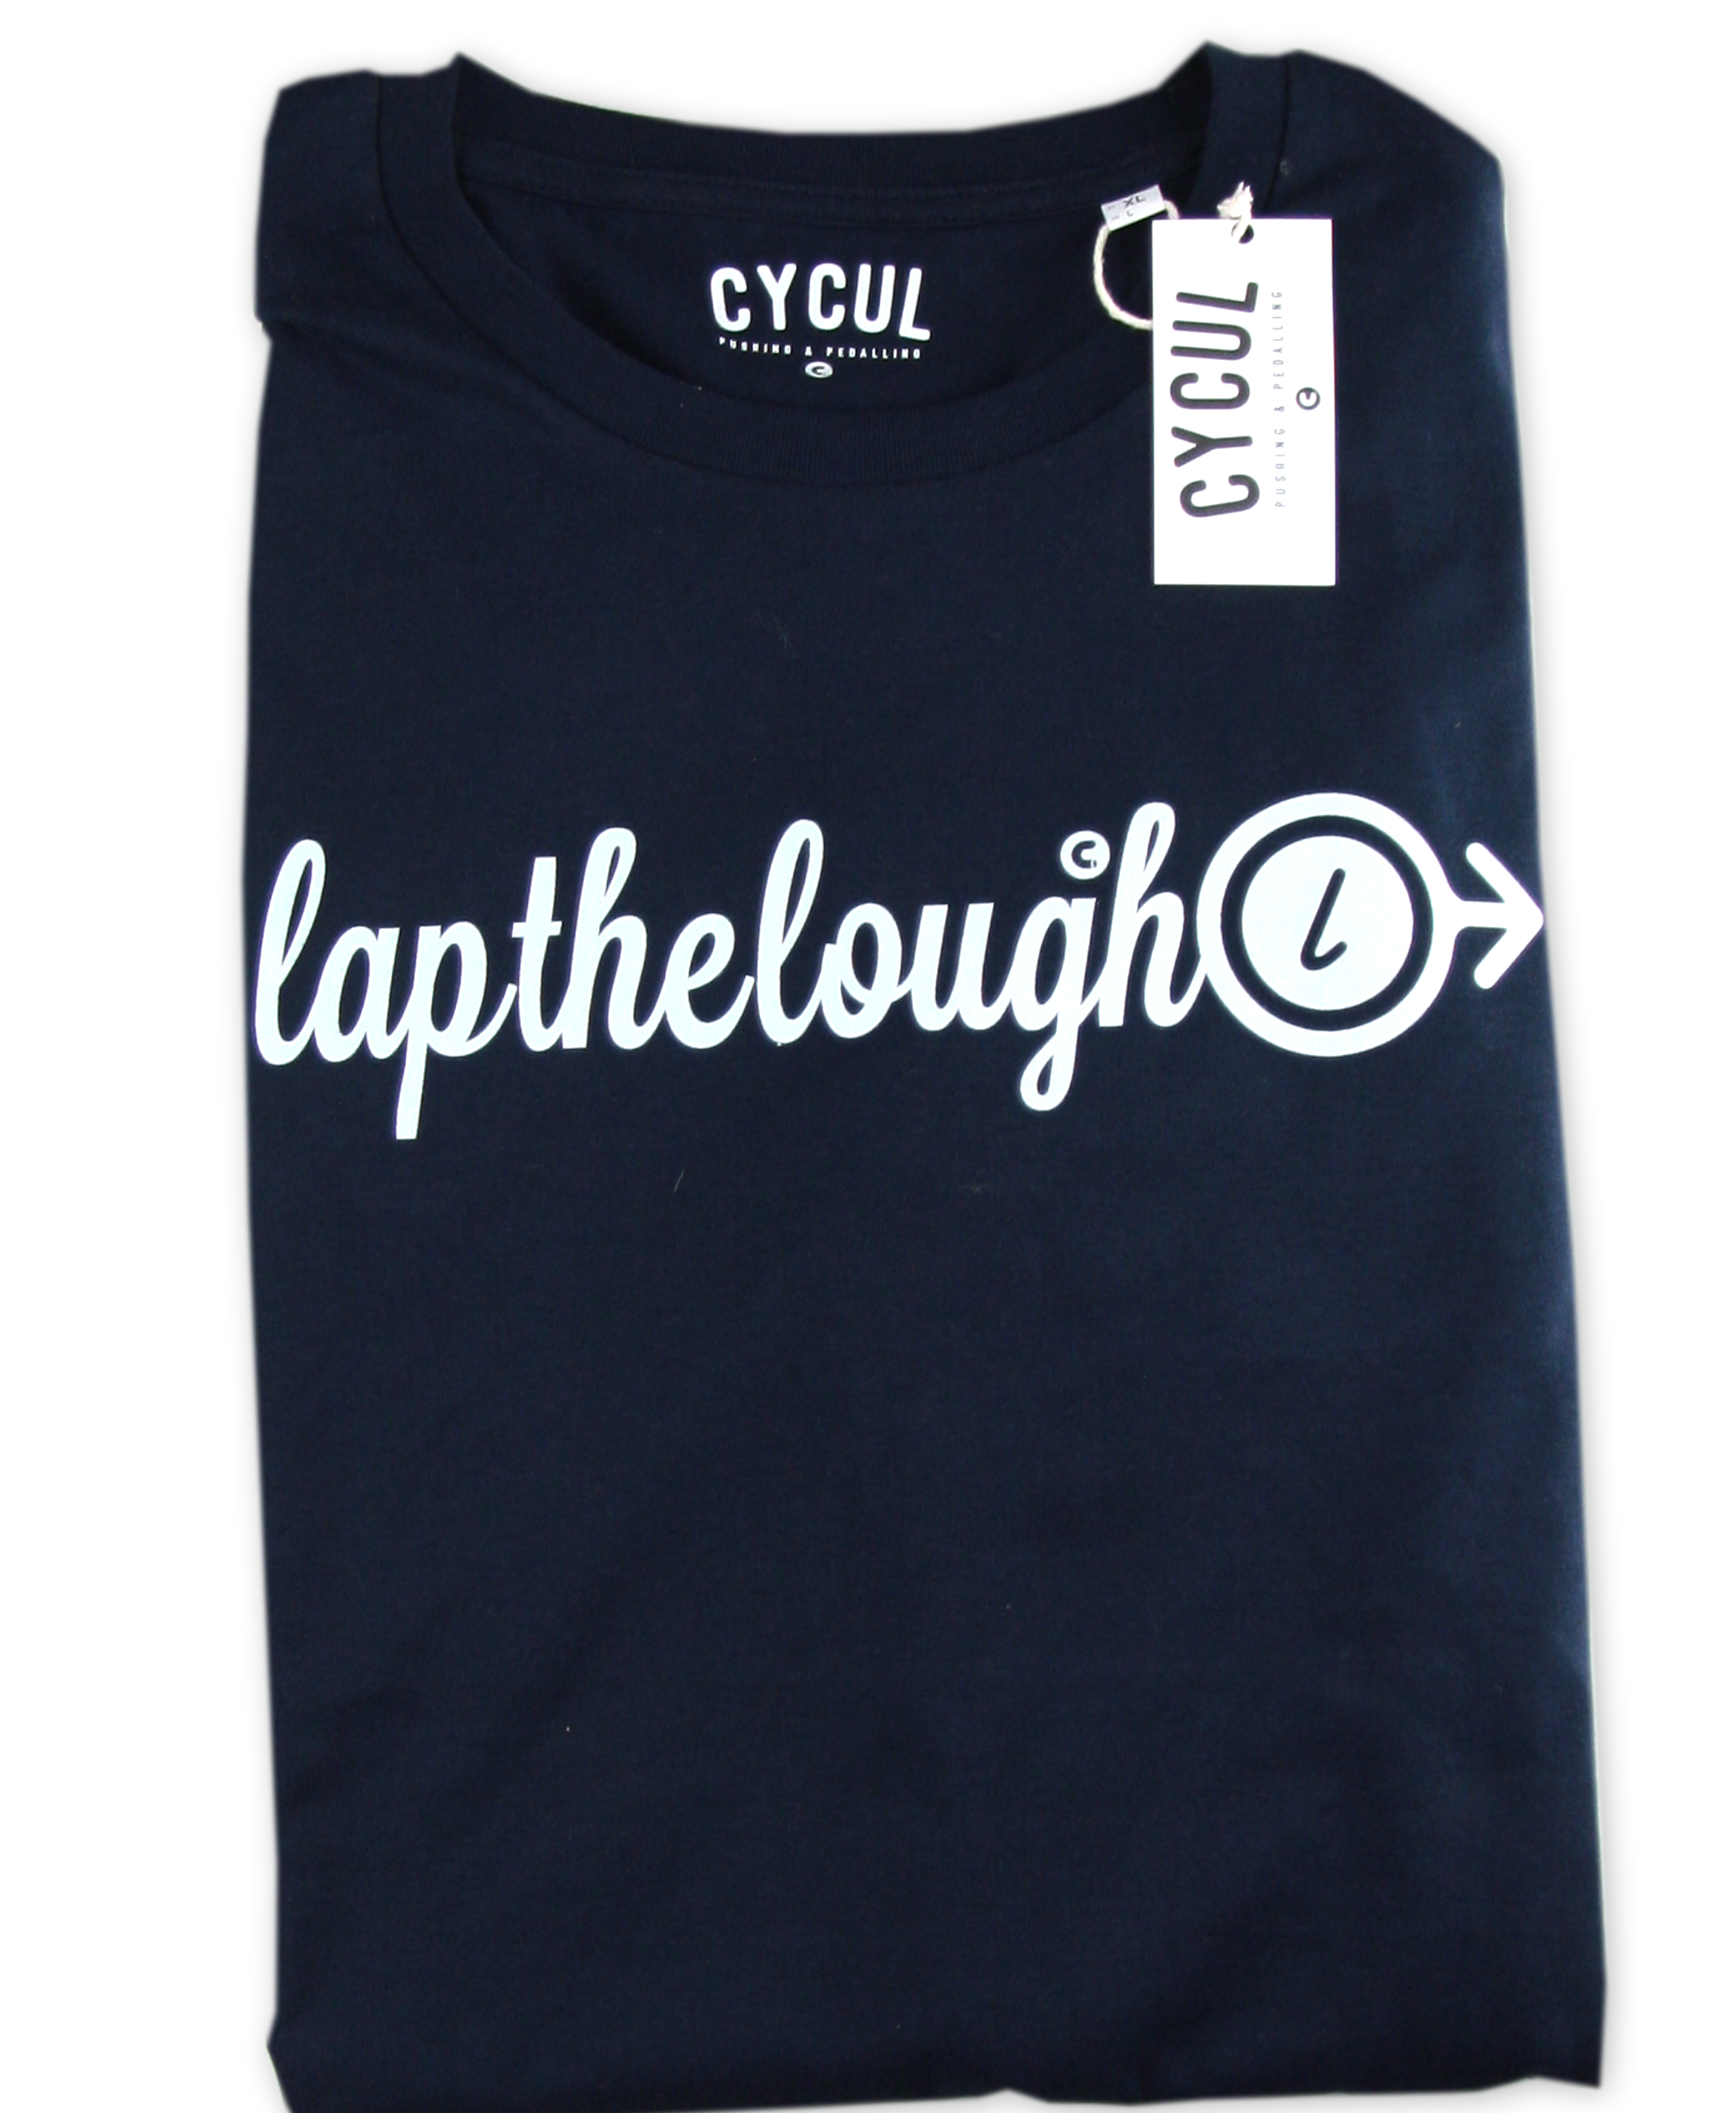 Lap the Lough - French Blue: limited supply